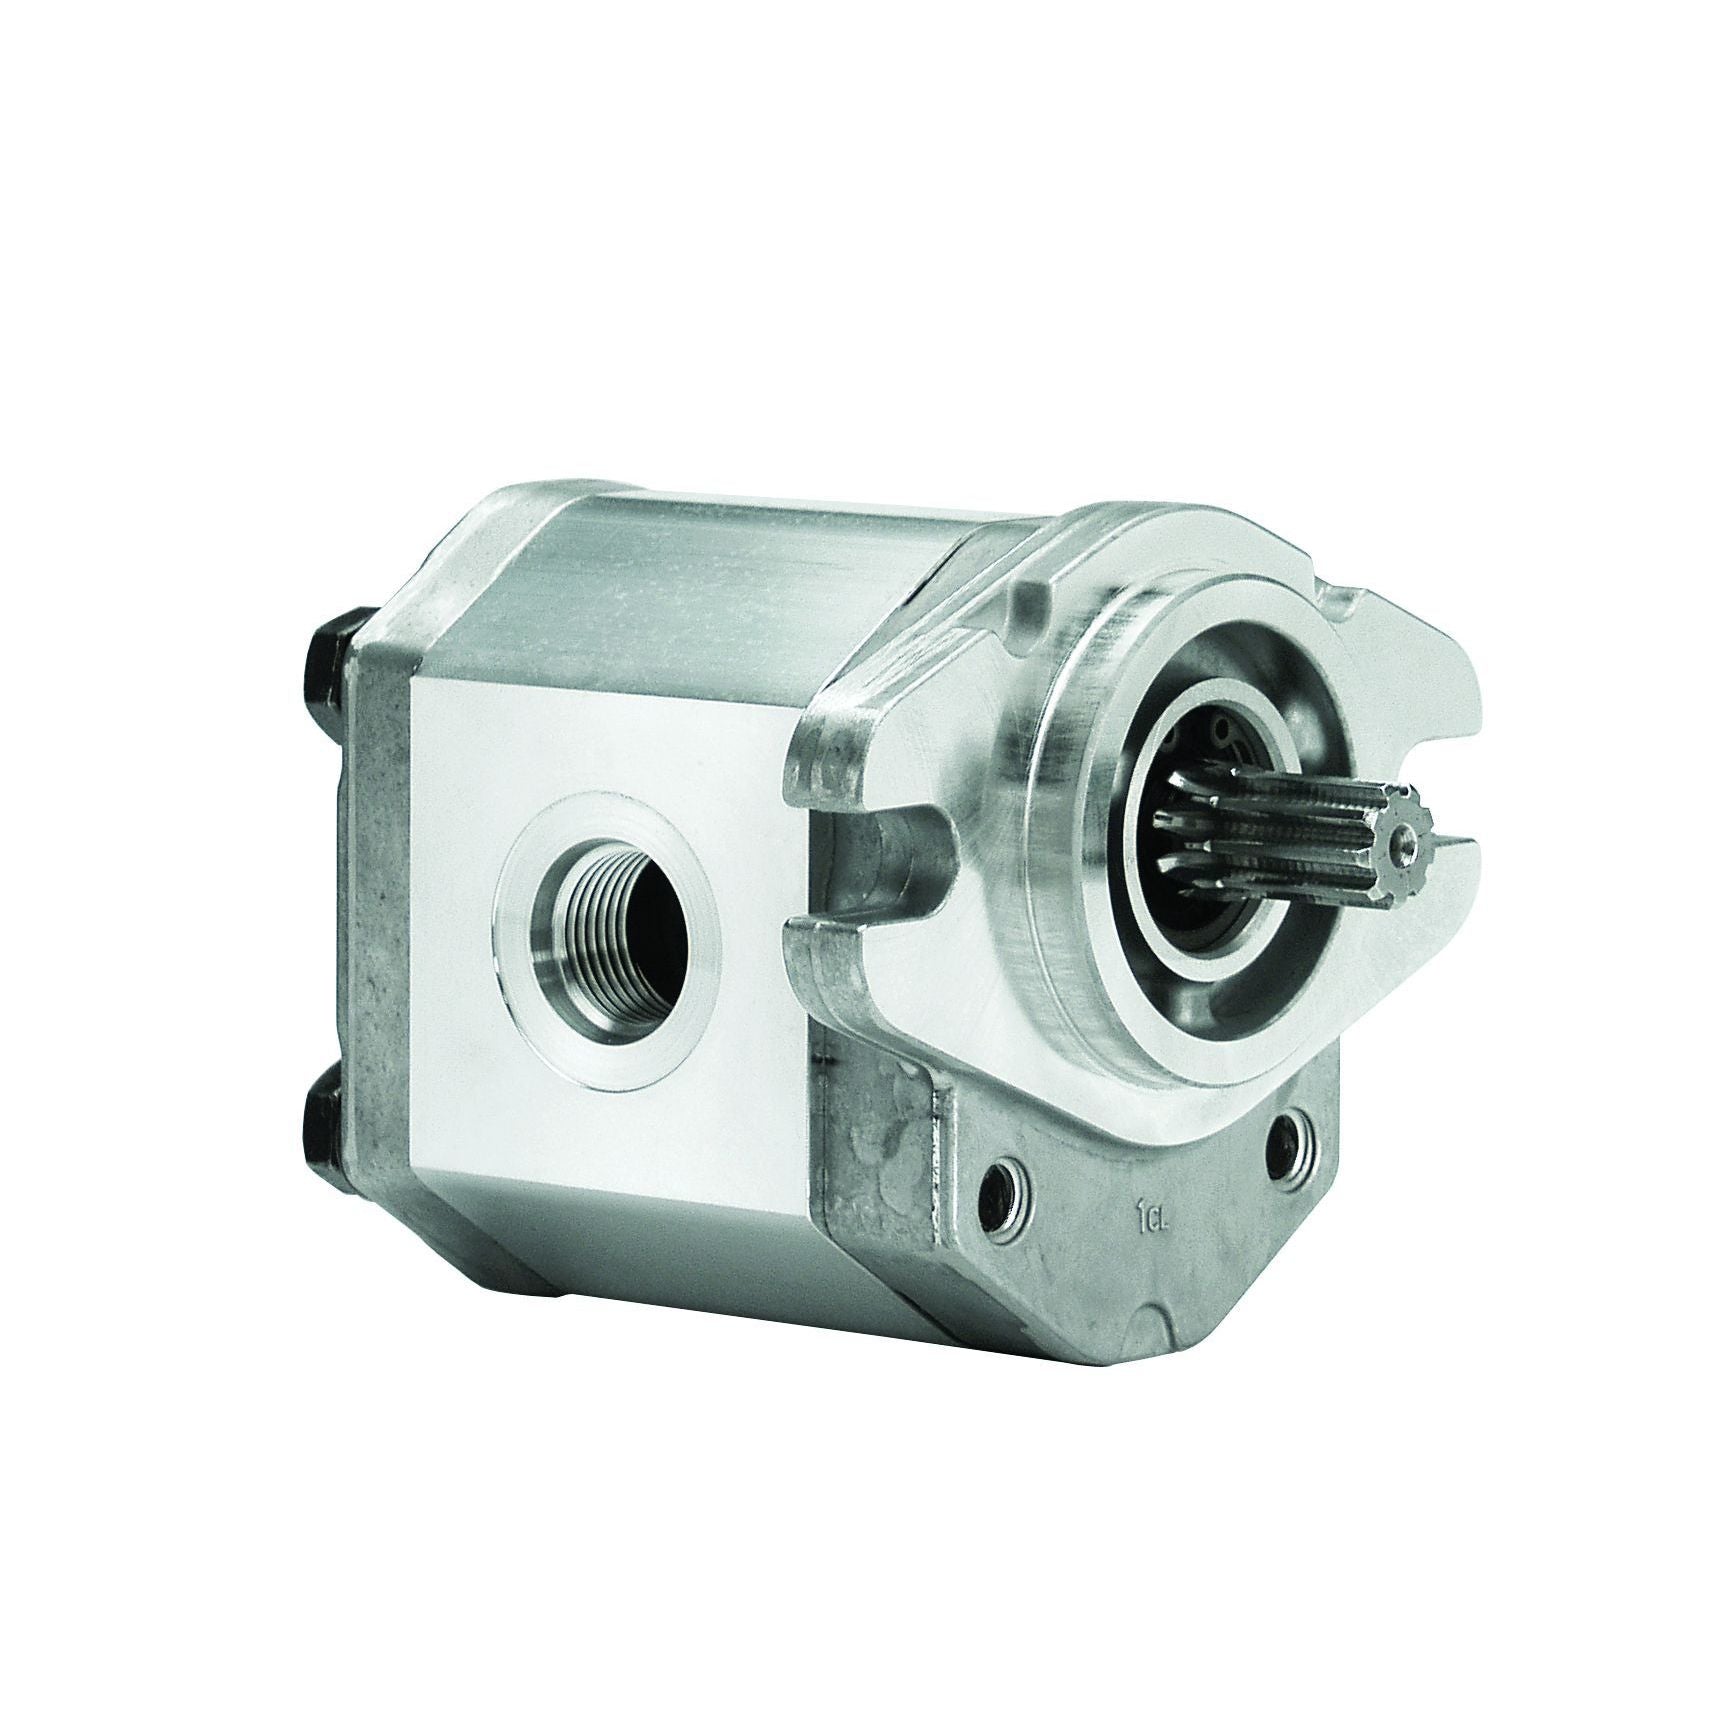 ALP2A-D-50-S1 : Marzocchi Gear Pump, CW, 35.2cc (2.1472in3), 16.73 GPM, 2030psi, 2000 RPM, #12 SAE (3/4") In, #10 SAE (5/8") Out, Splined Shaft 9T 16/32DP, SAE A 2-Bolt Mount